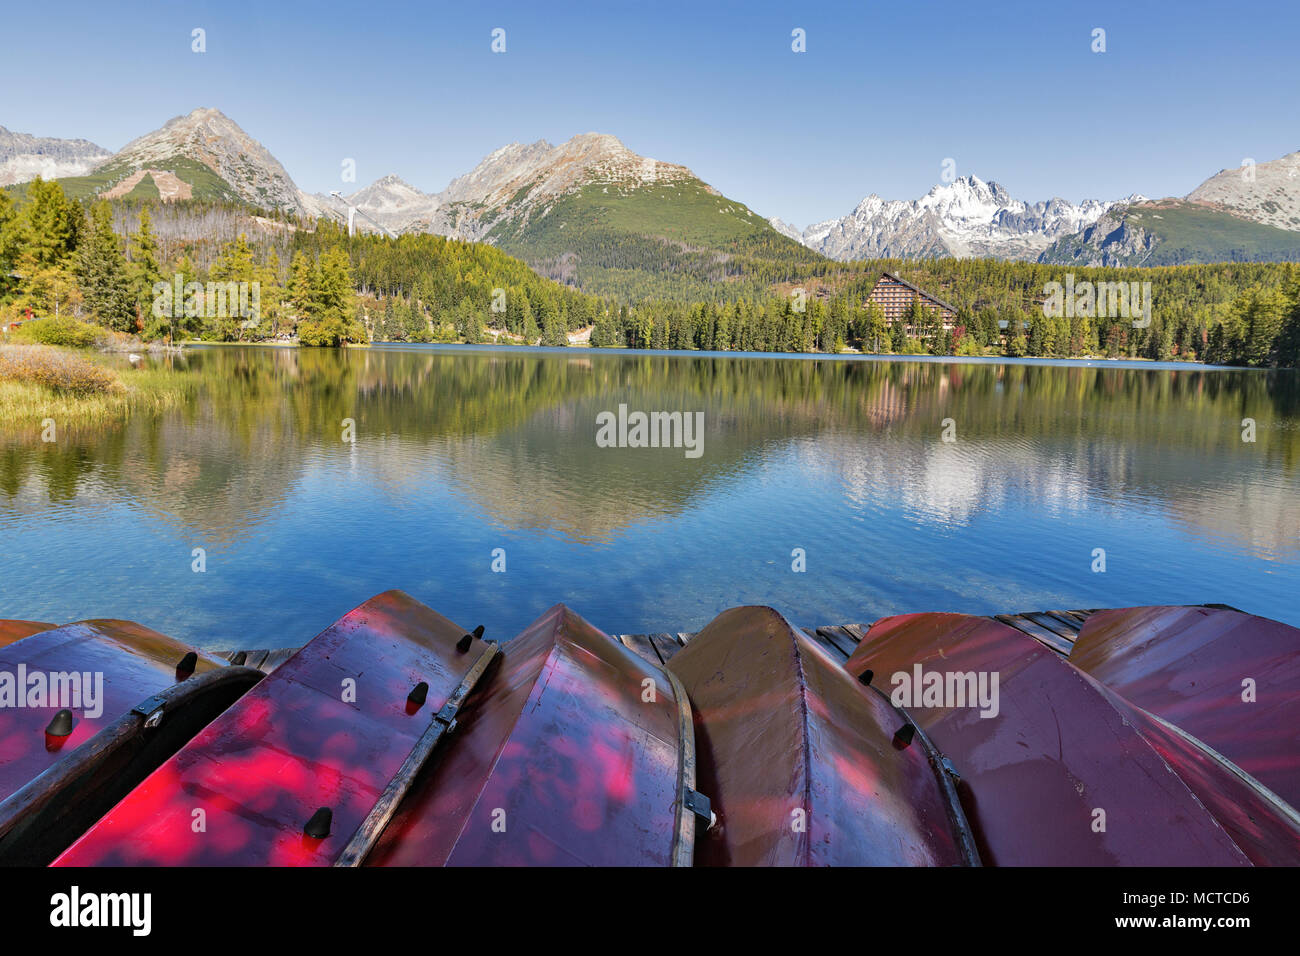 Red flipped over recreational boats on Strbske Lake shore in Slovakia. It is a favorite ski, tourist, and health resort in the High Tatras. Stock Photo